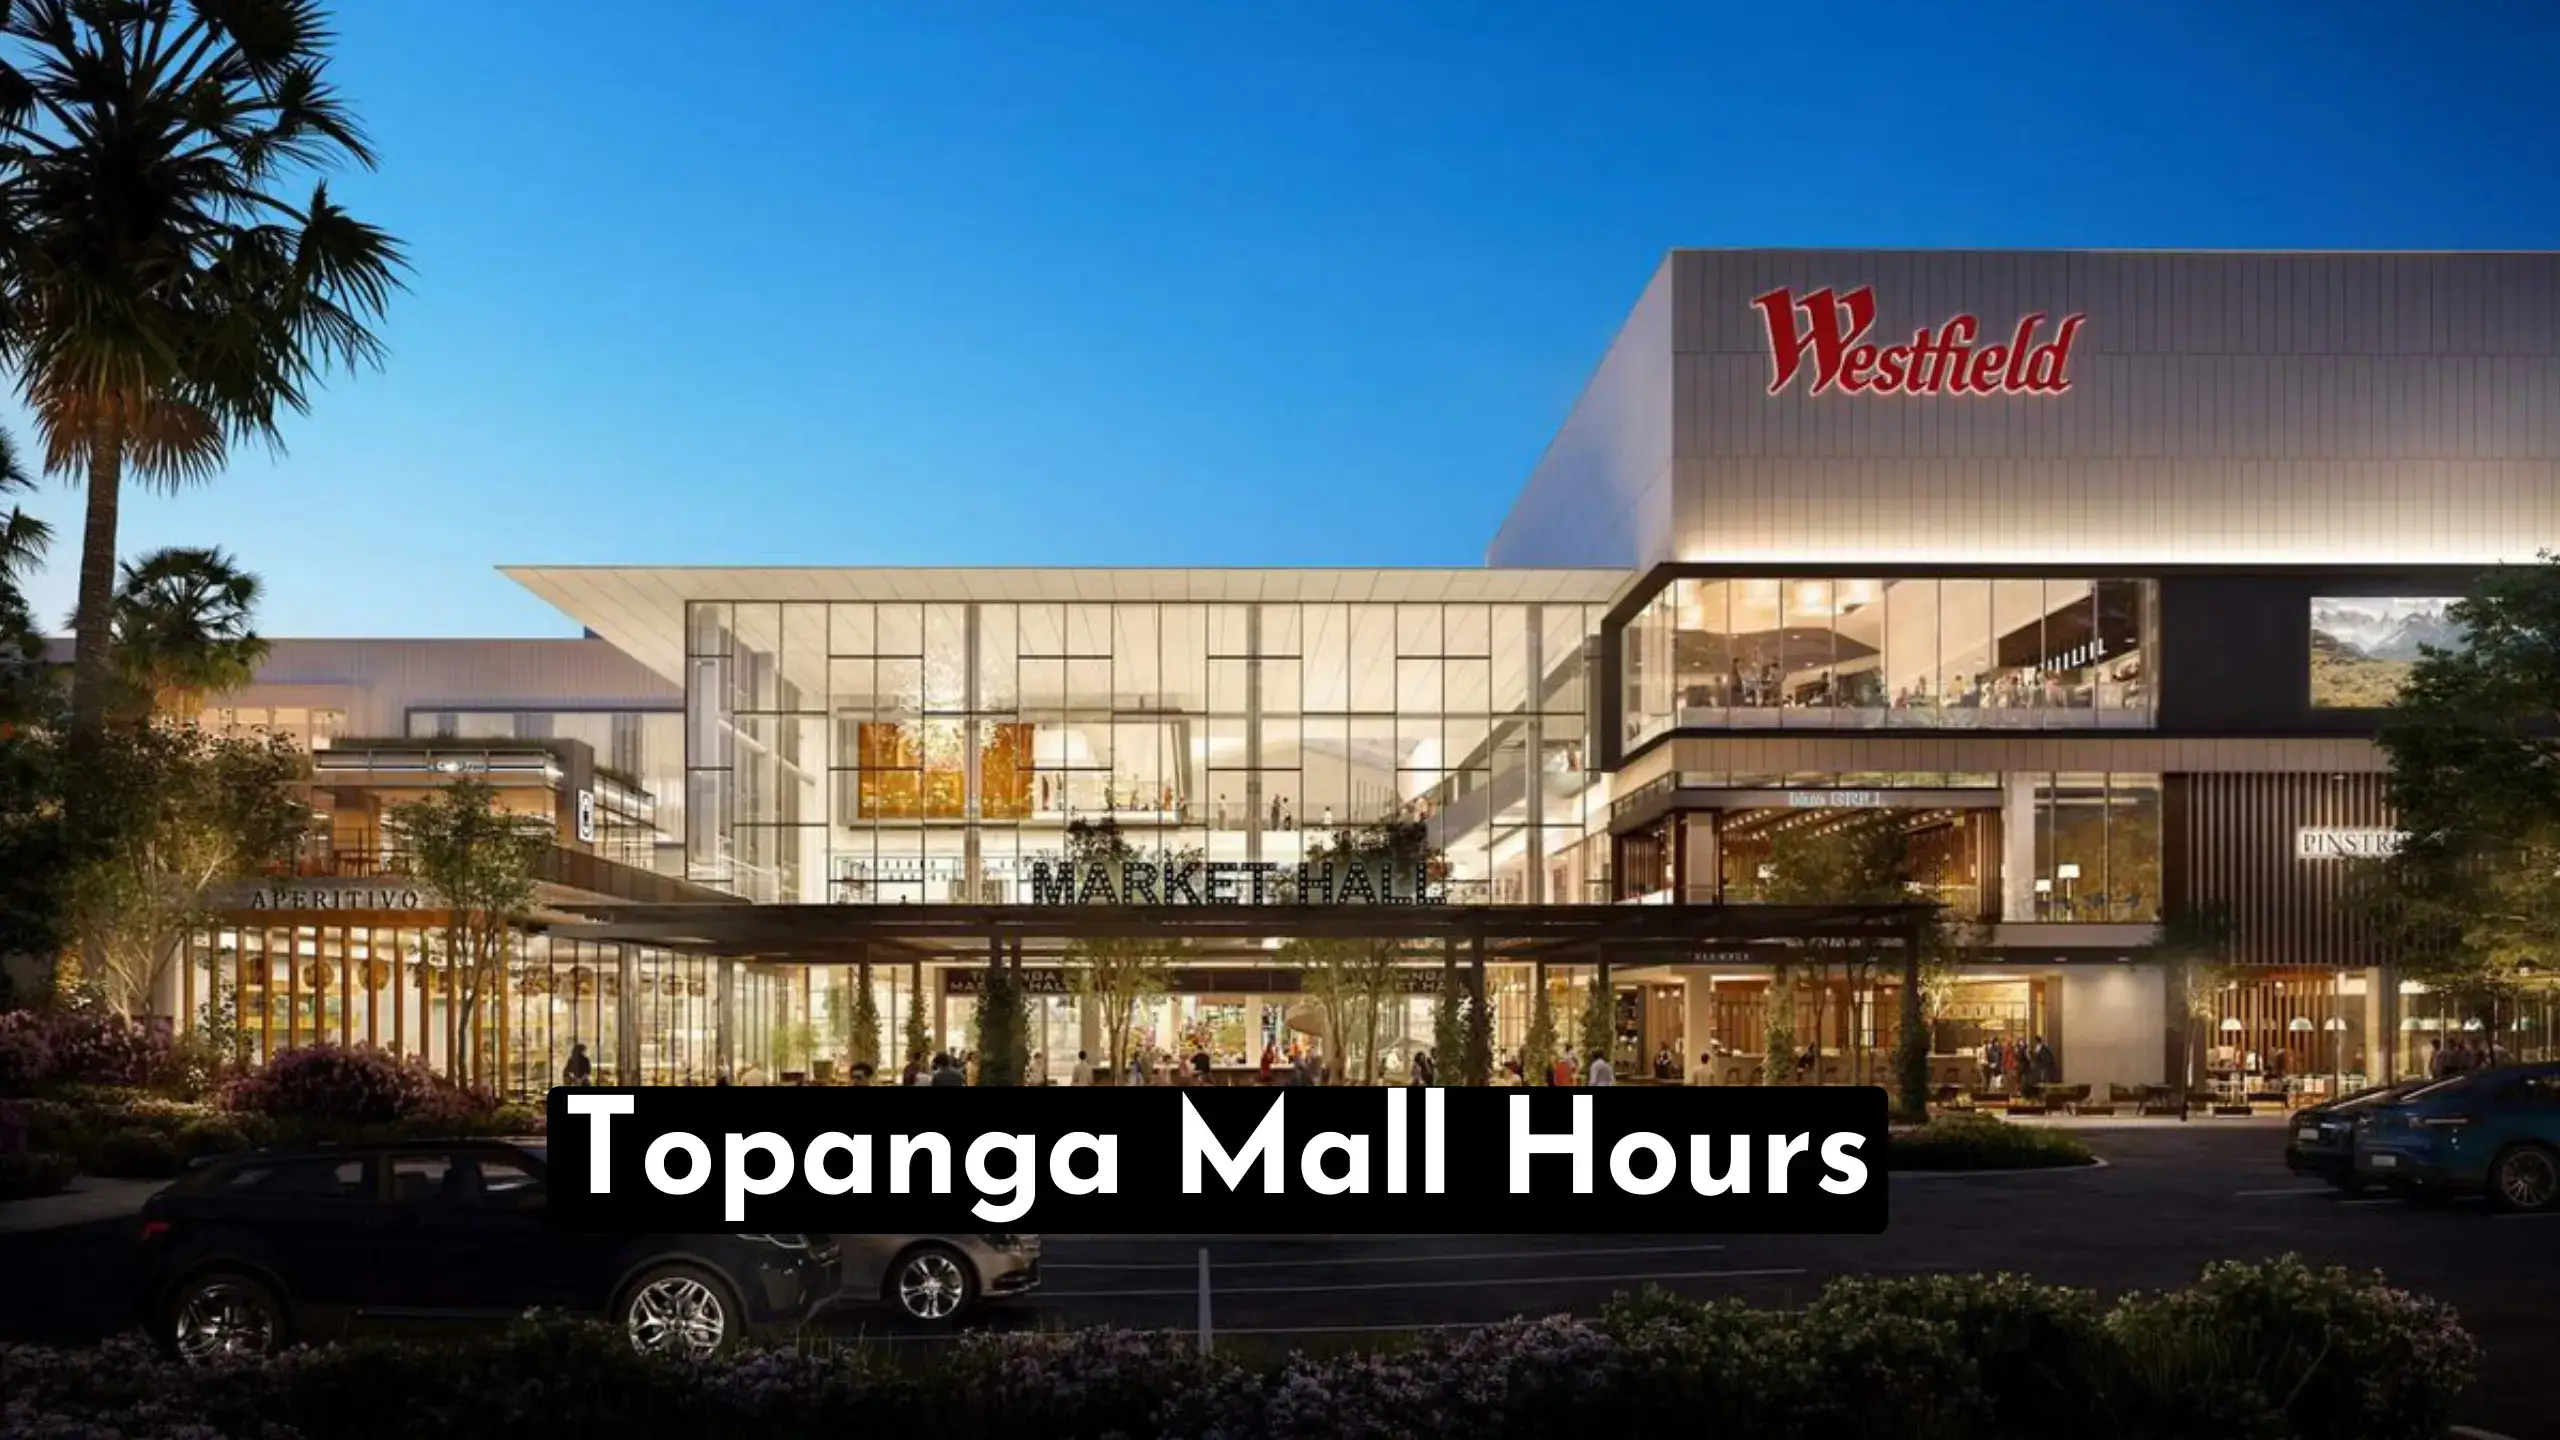 A Quick Guide To Diiscover Topanga Mall Hours | Also Quickly Find Info Regarding Mall Amenities, Stores, Eateries & Much More | store-hour.com